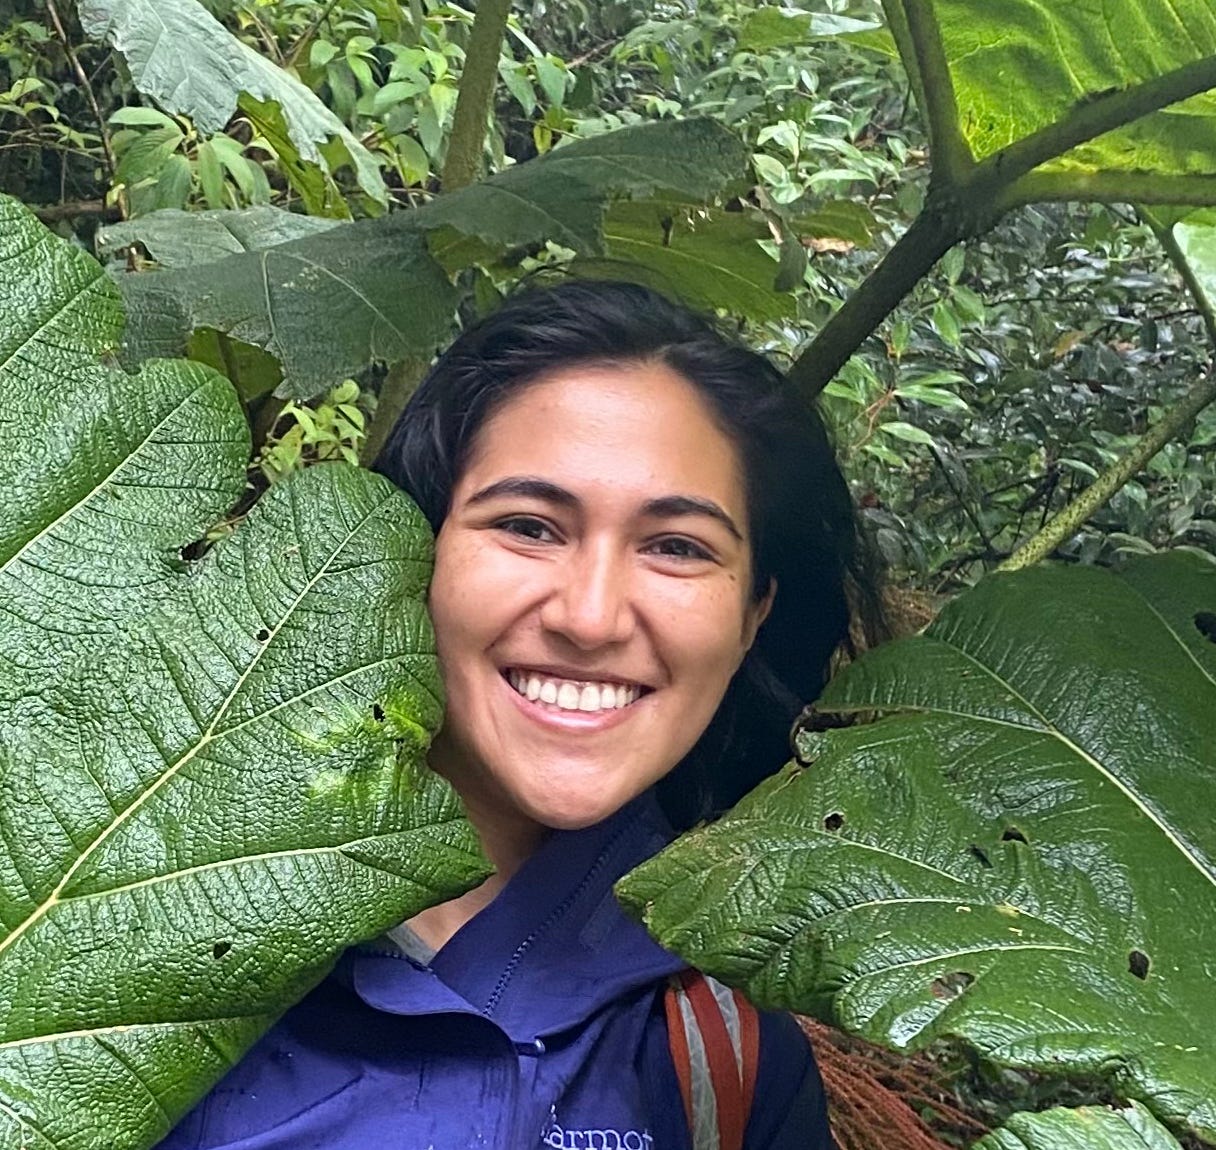 Donate to Researcher Luciana and HRW to fight deforestation.